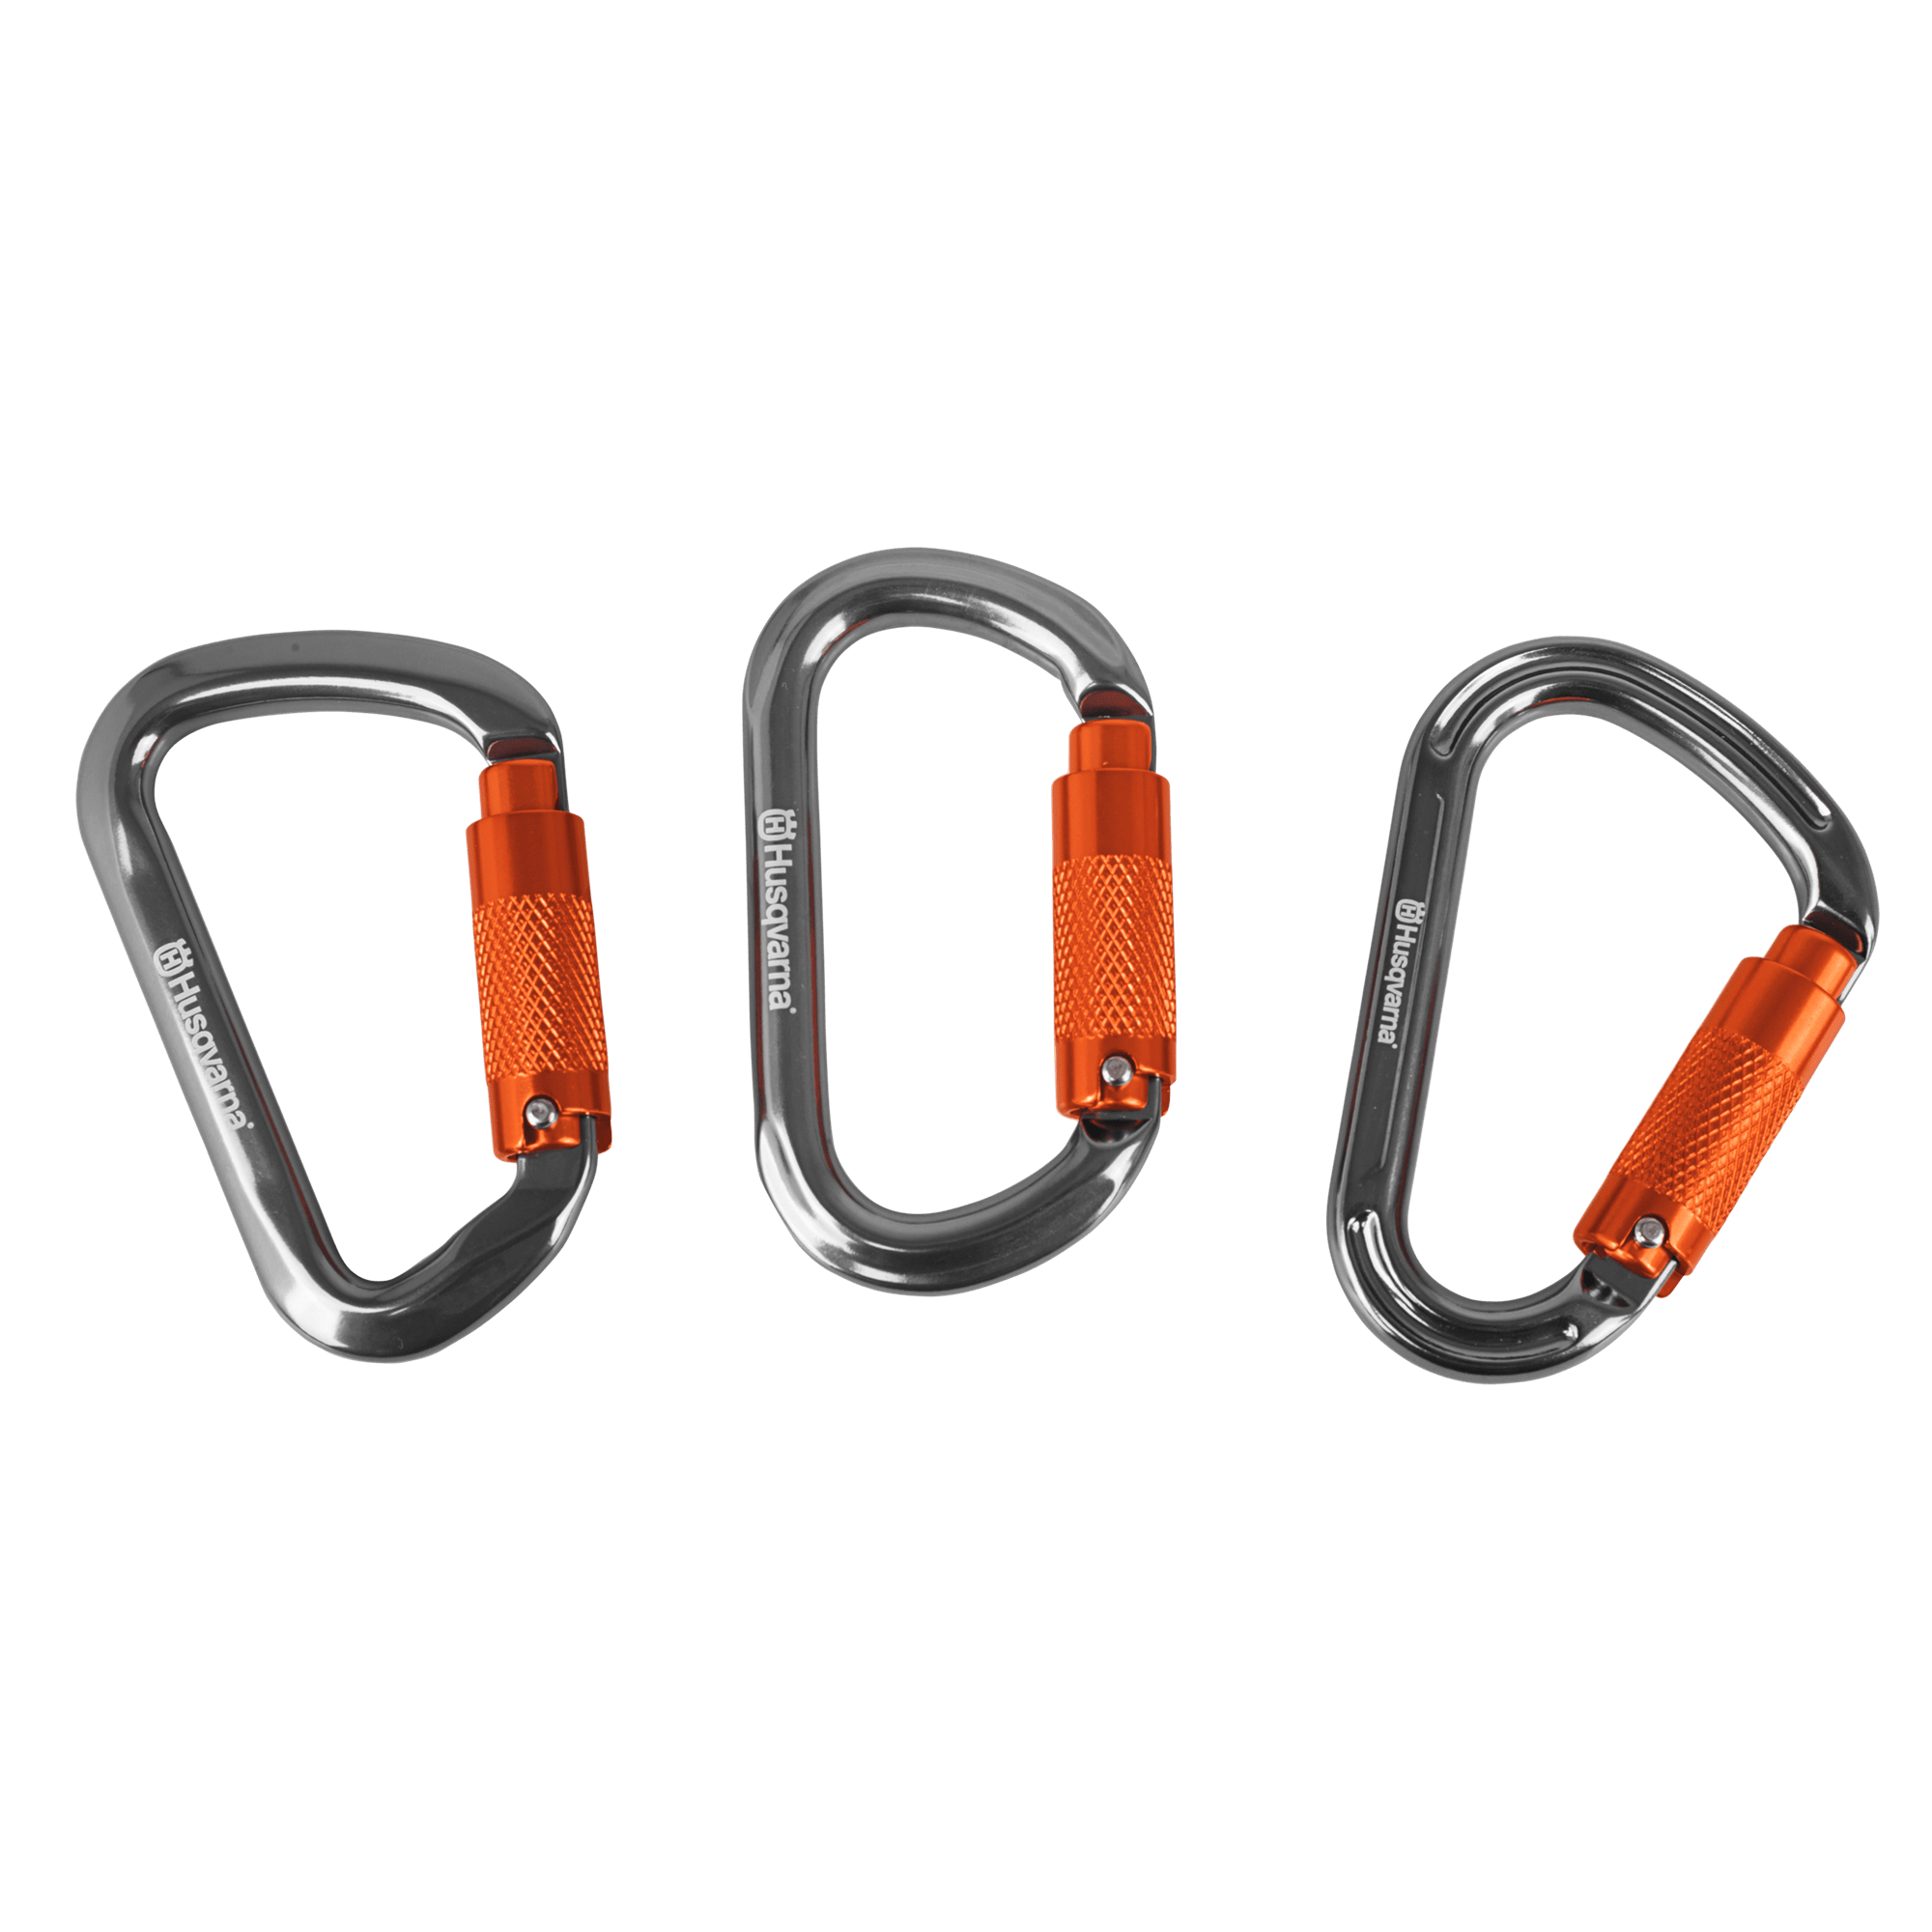 Image for Carabiners                                                                                                                       from HusqvarnaB2C